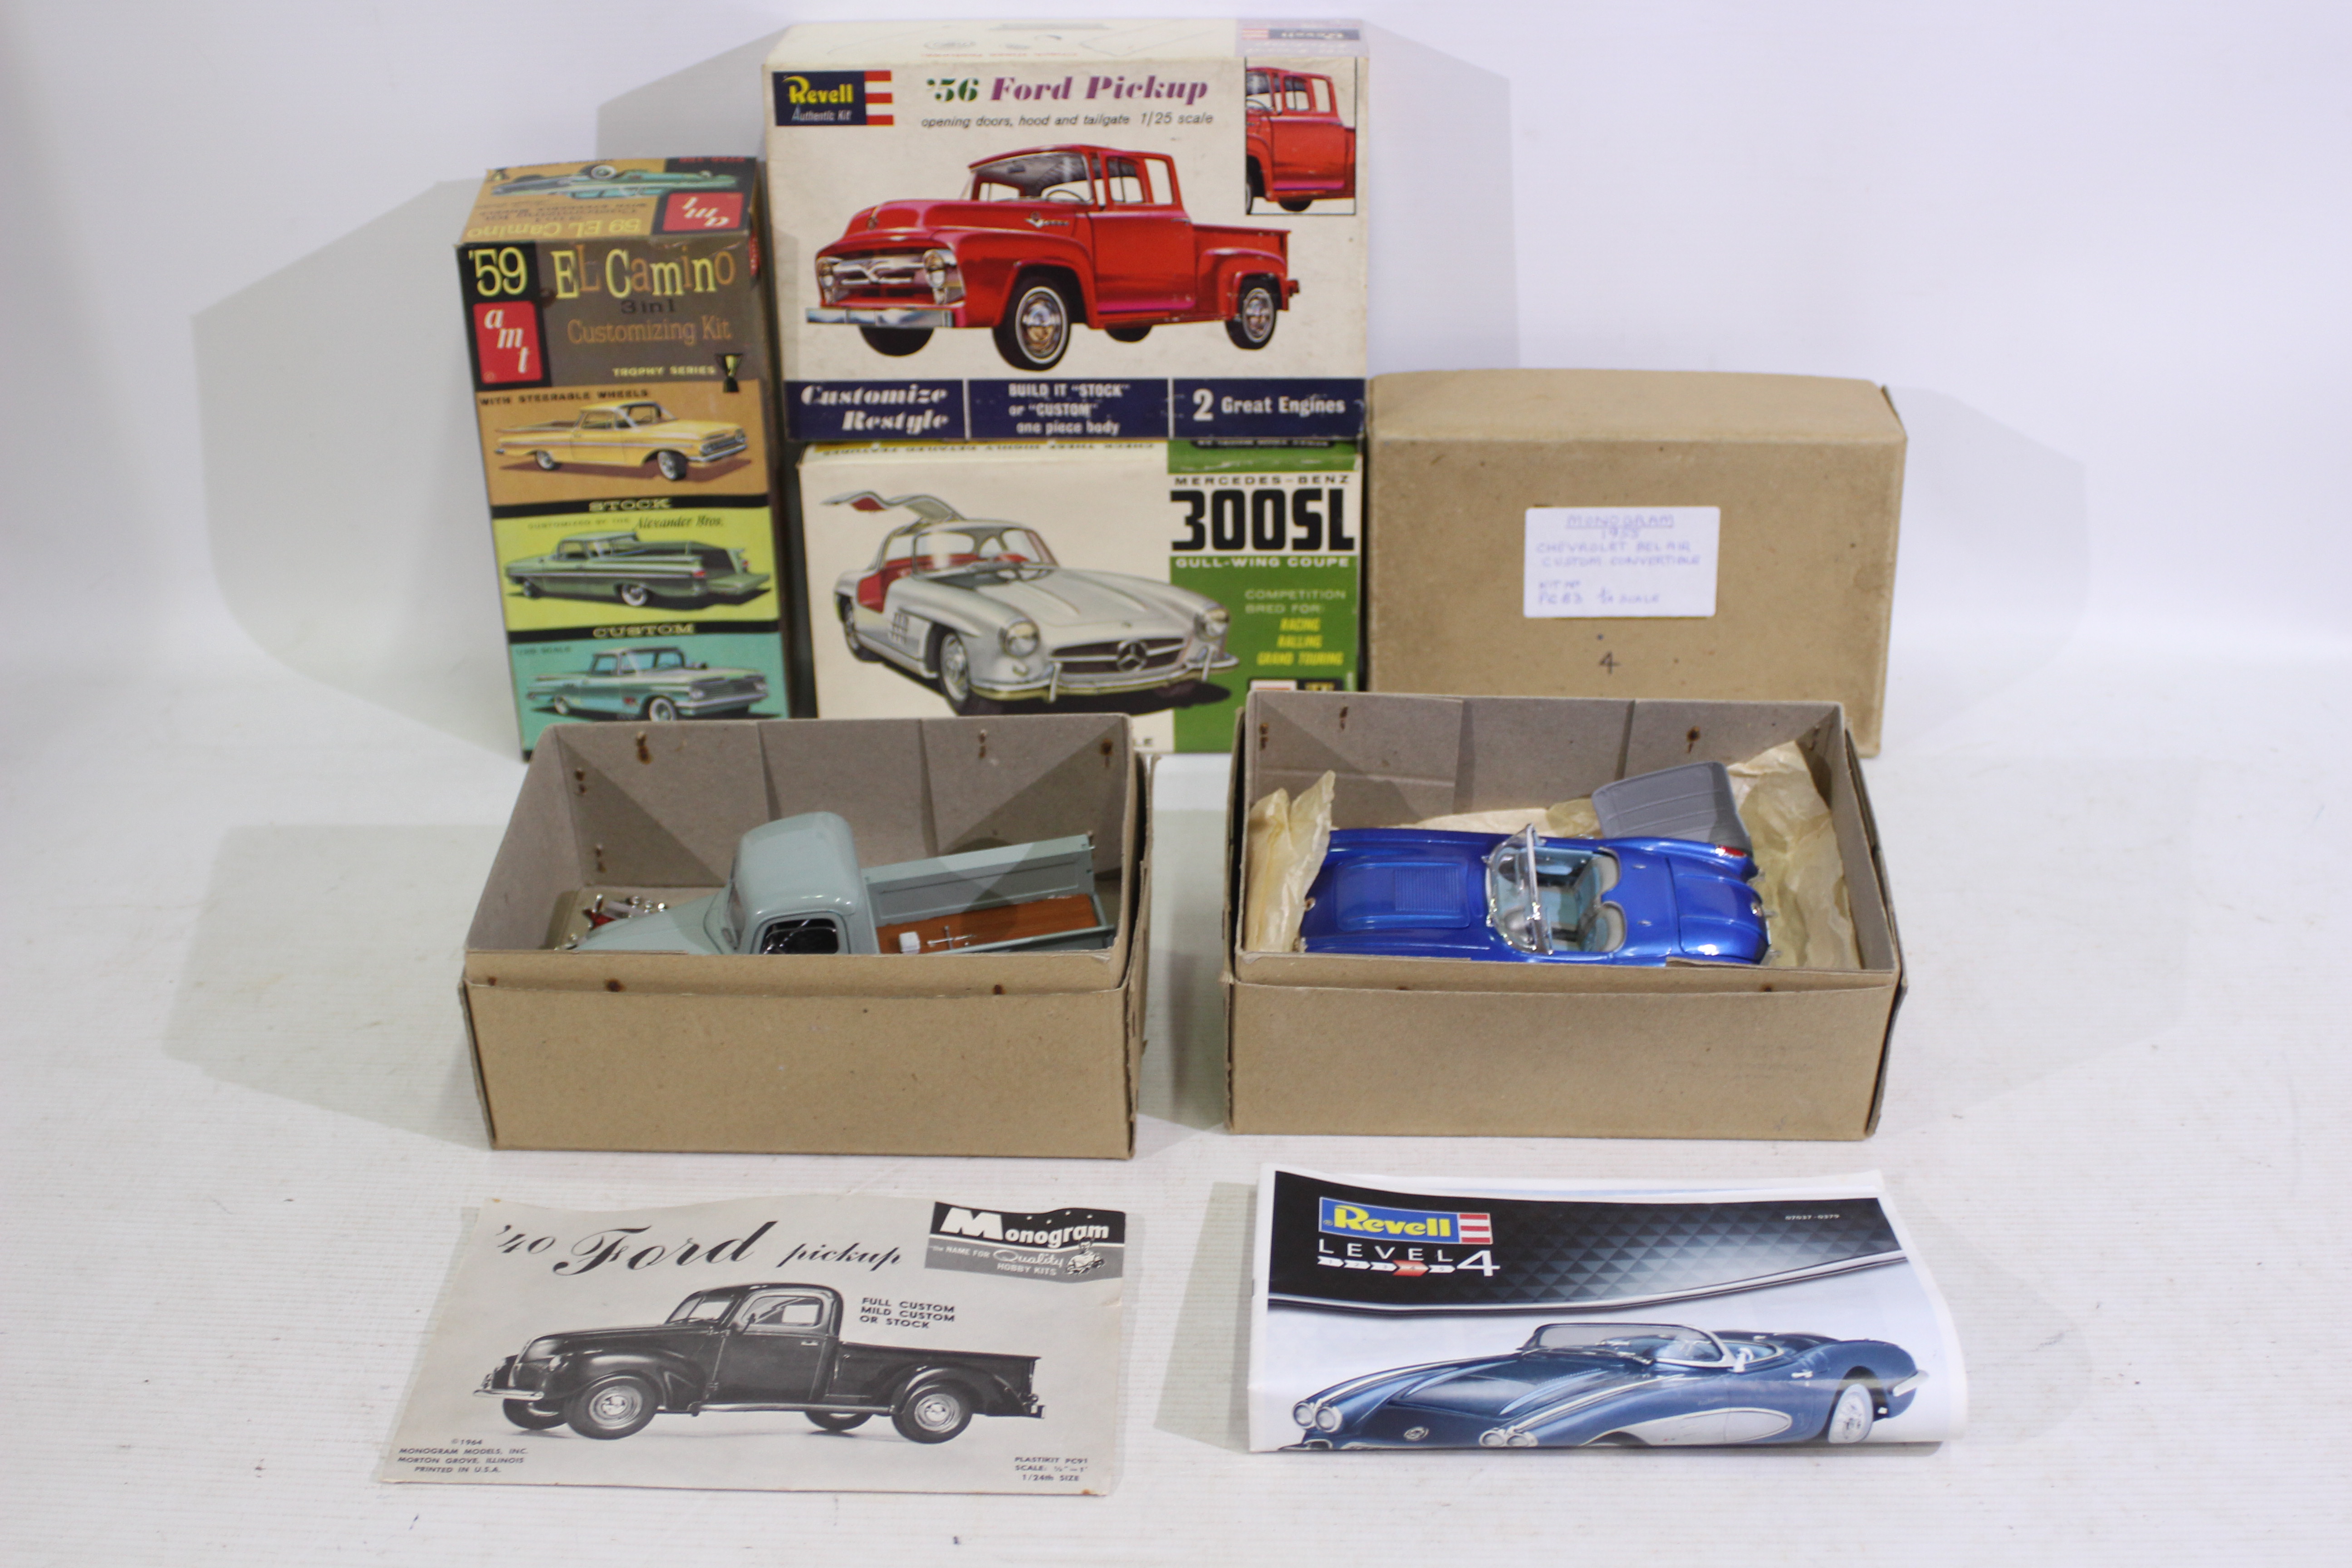 Revel - Monogram - AMT - 6 x vintage model kits which have been built, 1956 Ford Pickup,